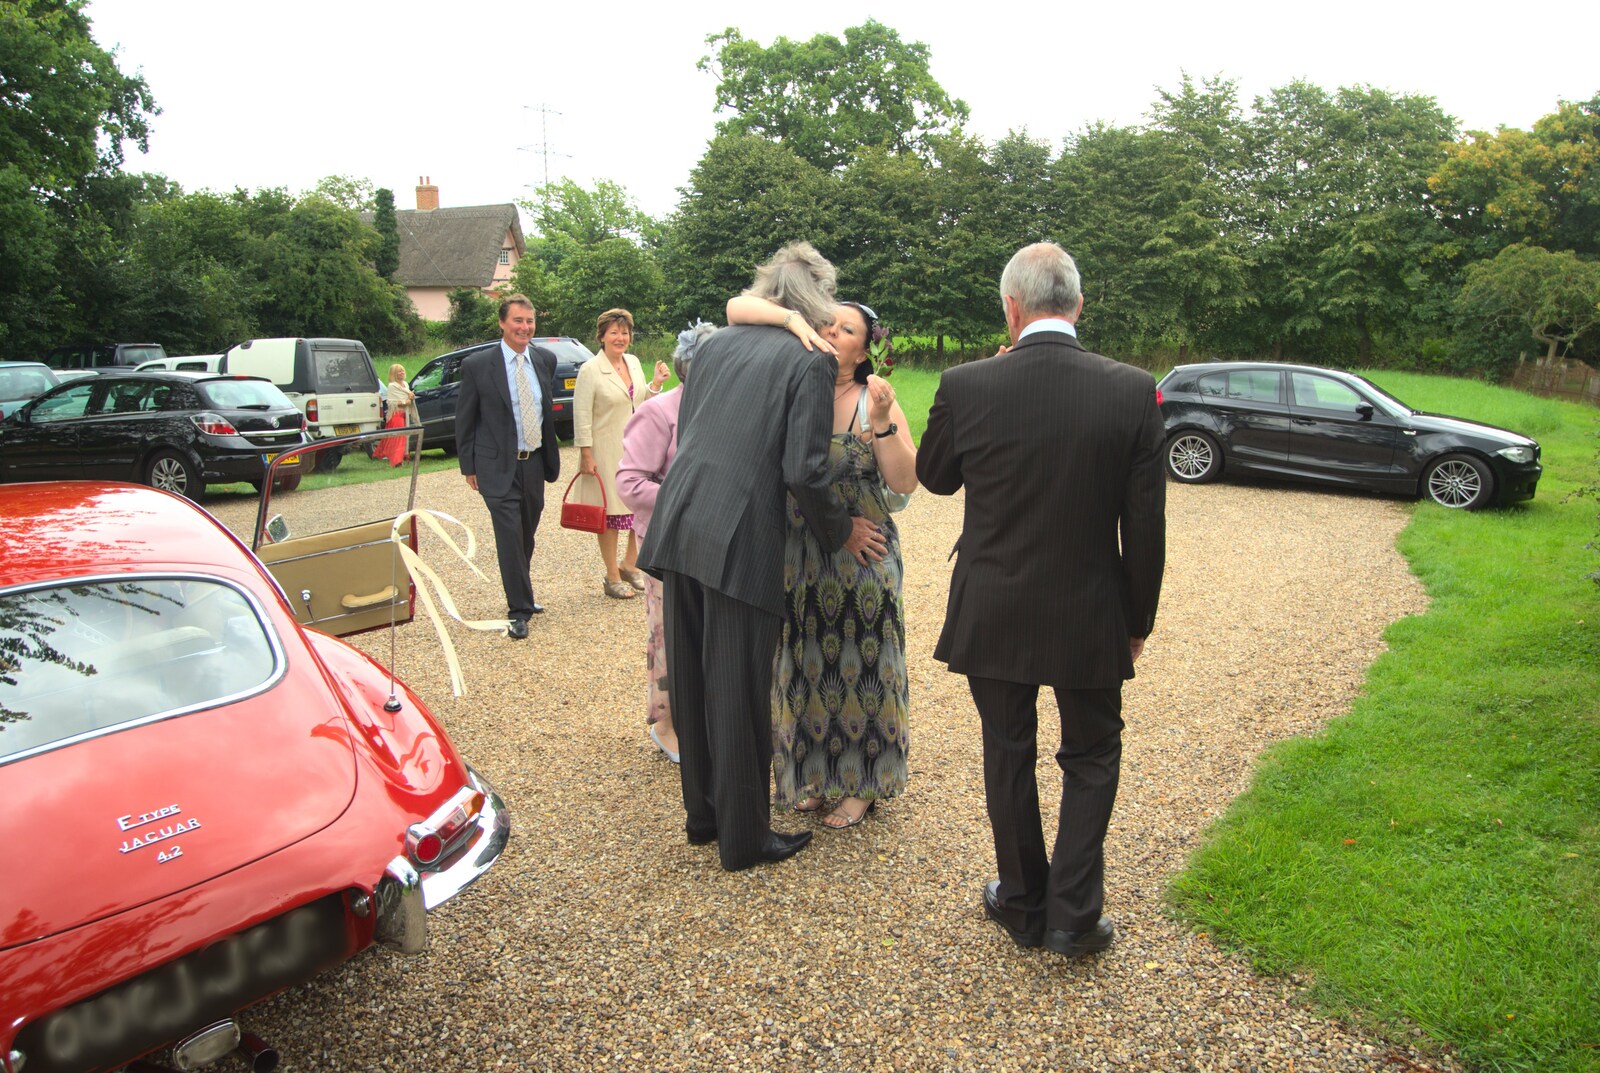 Rob greets some more guests from Rob and Wilma's Wedding, Thornham and Thrandeston, Suffolk - 6th August 2011